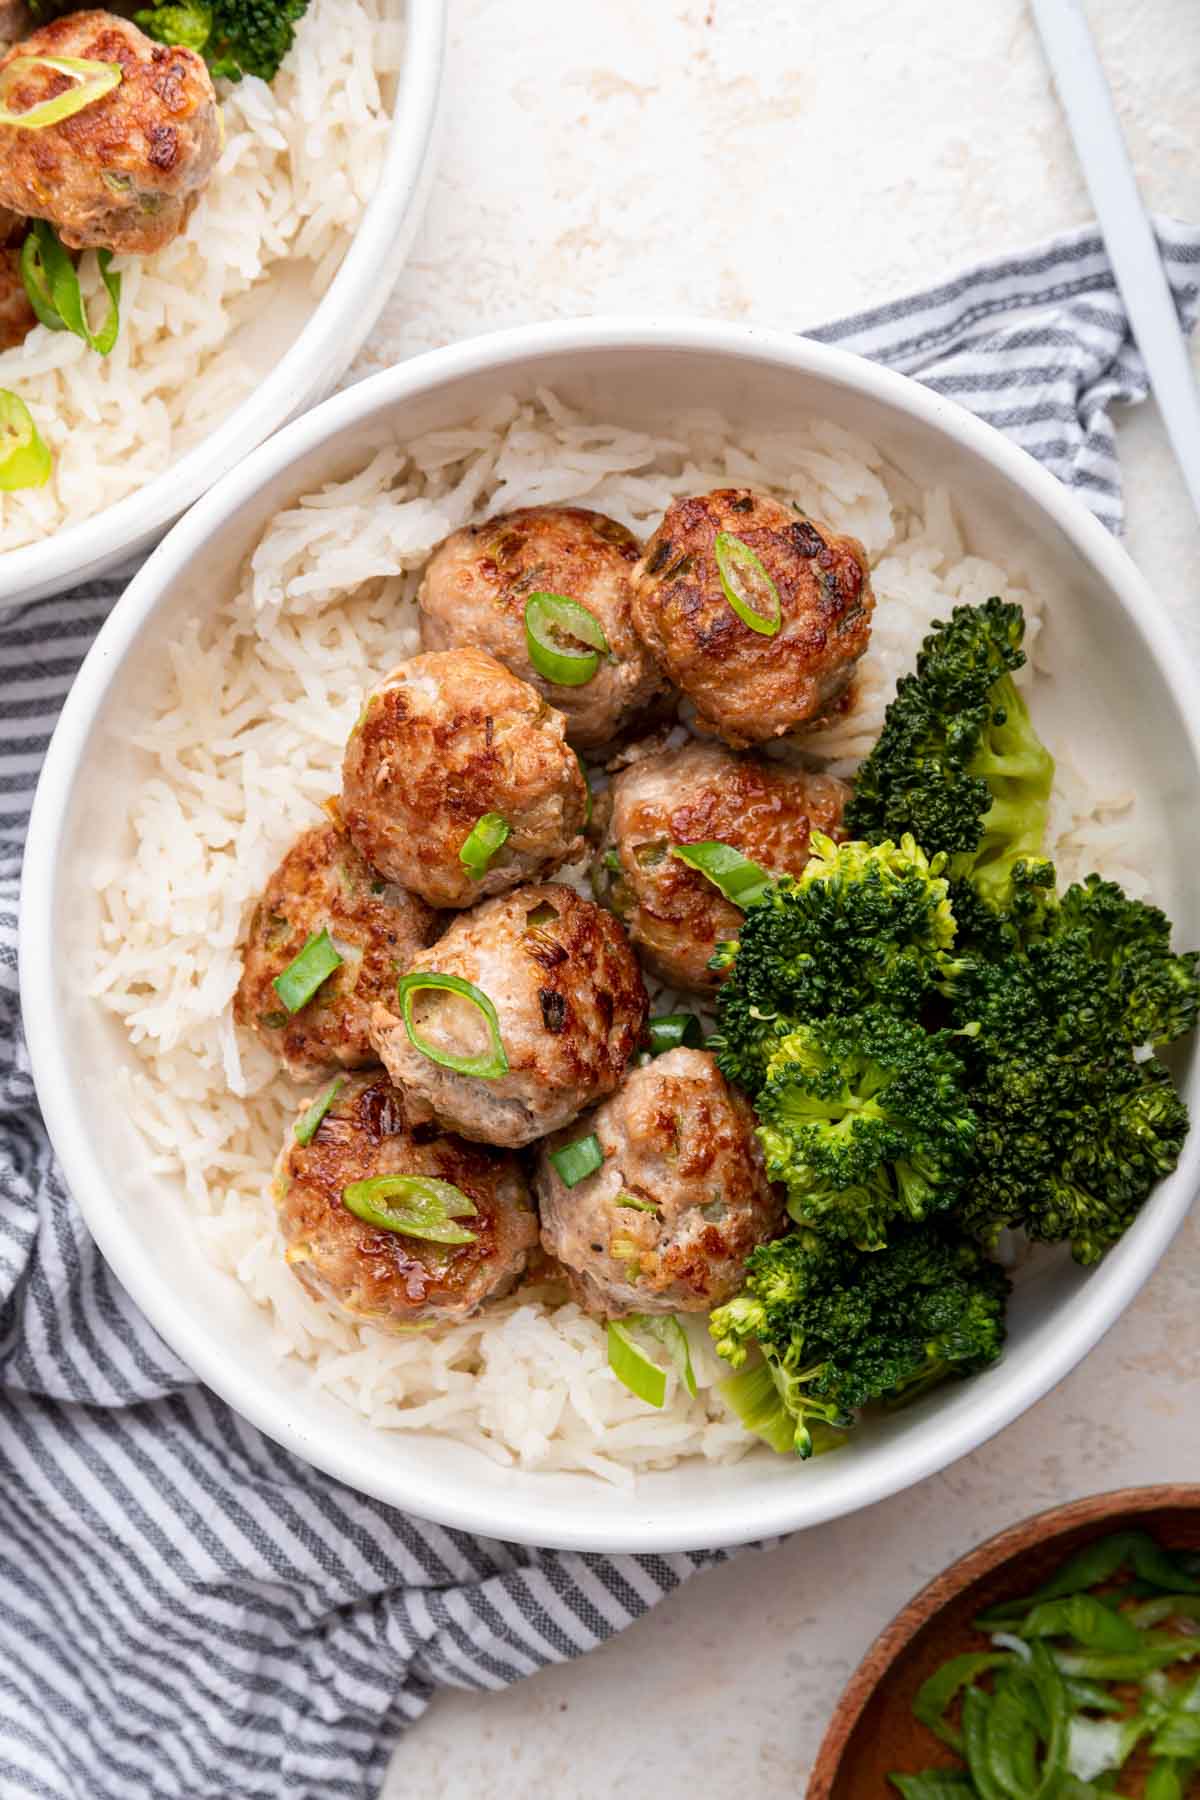 Overhead shot of pork meatballs over rice with broccoli in the bowl.